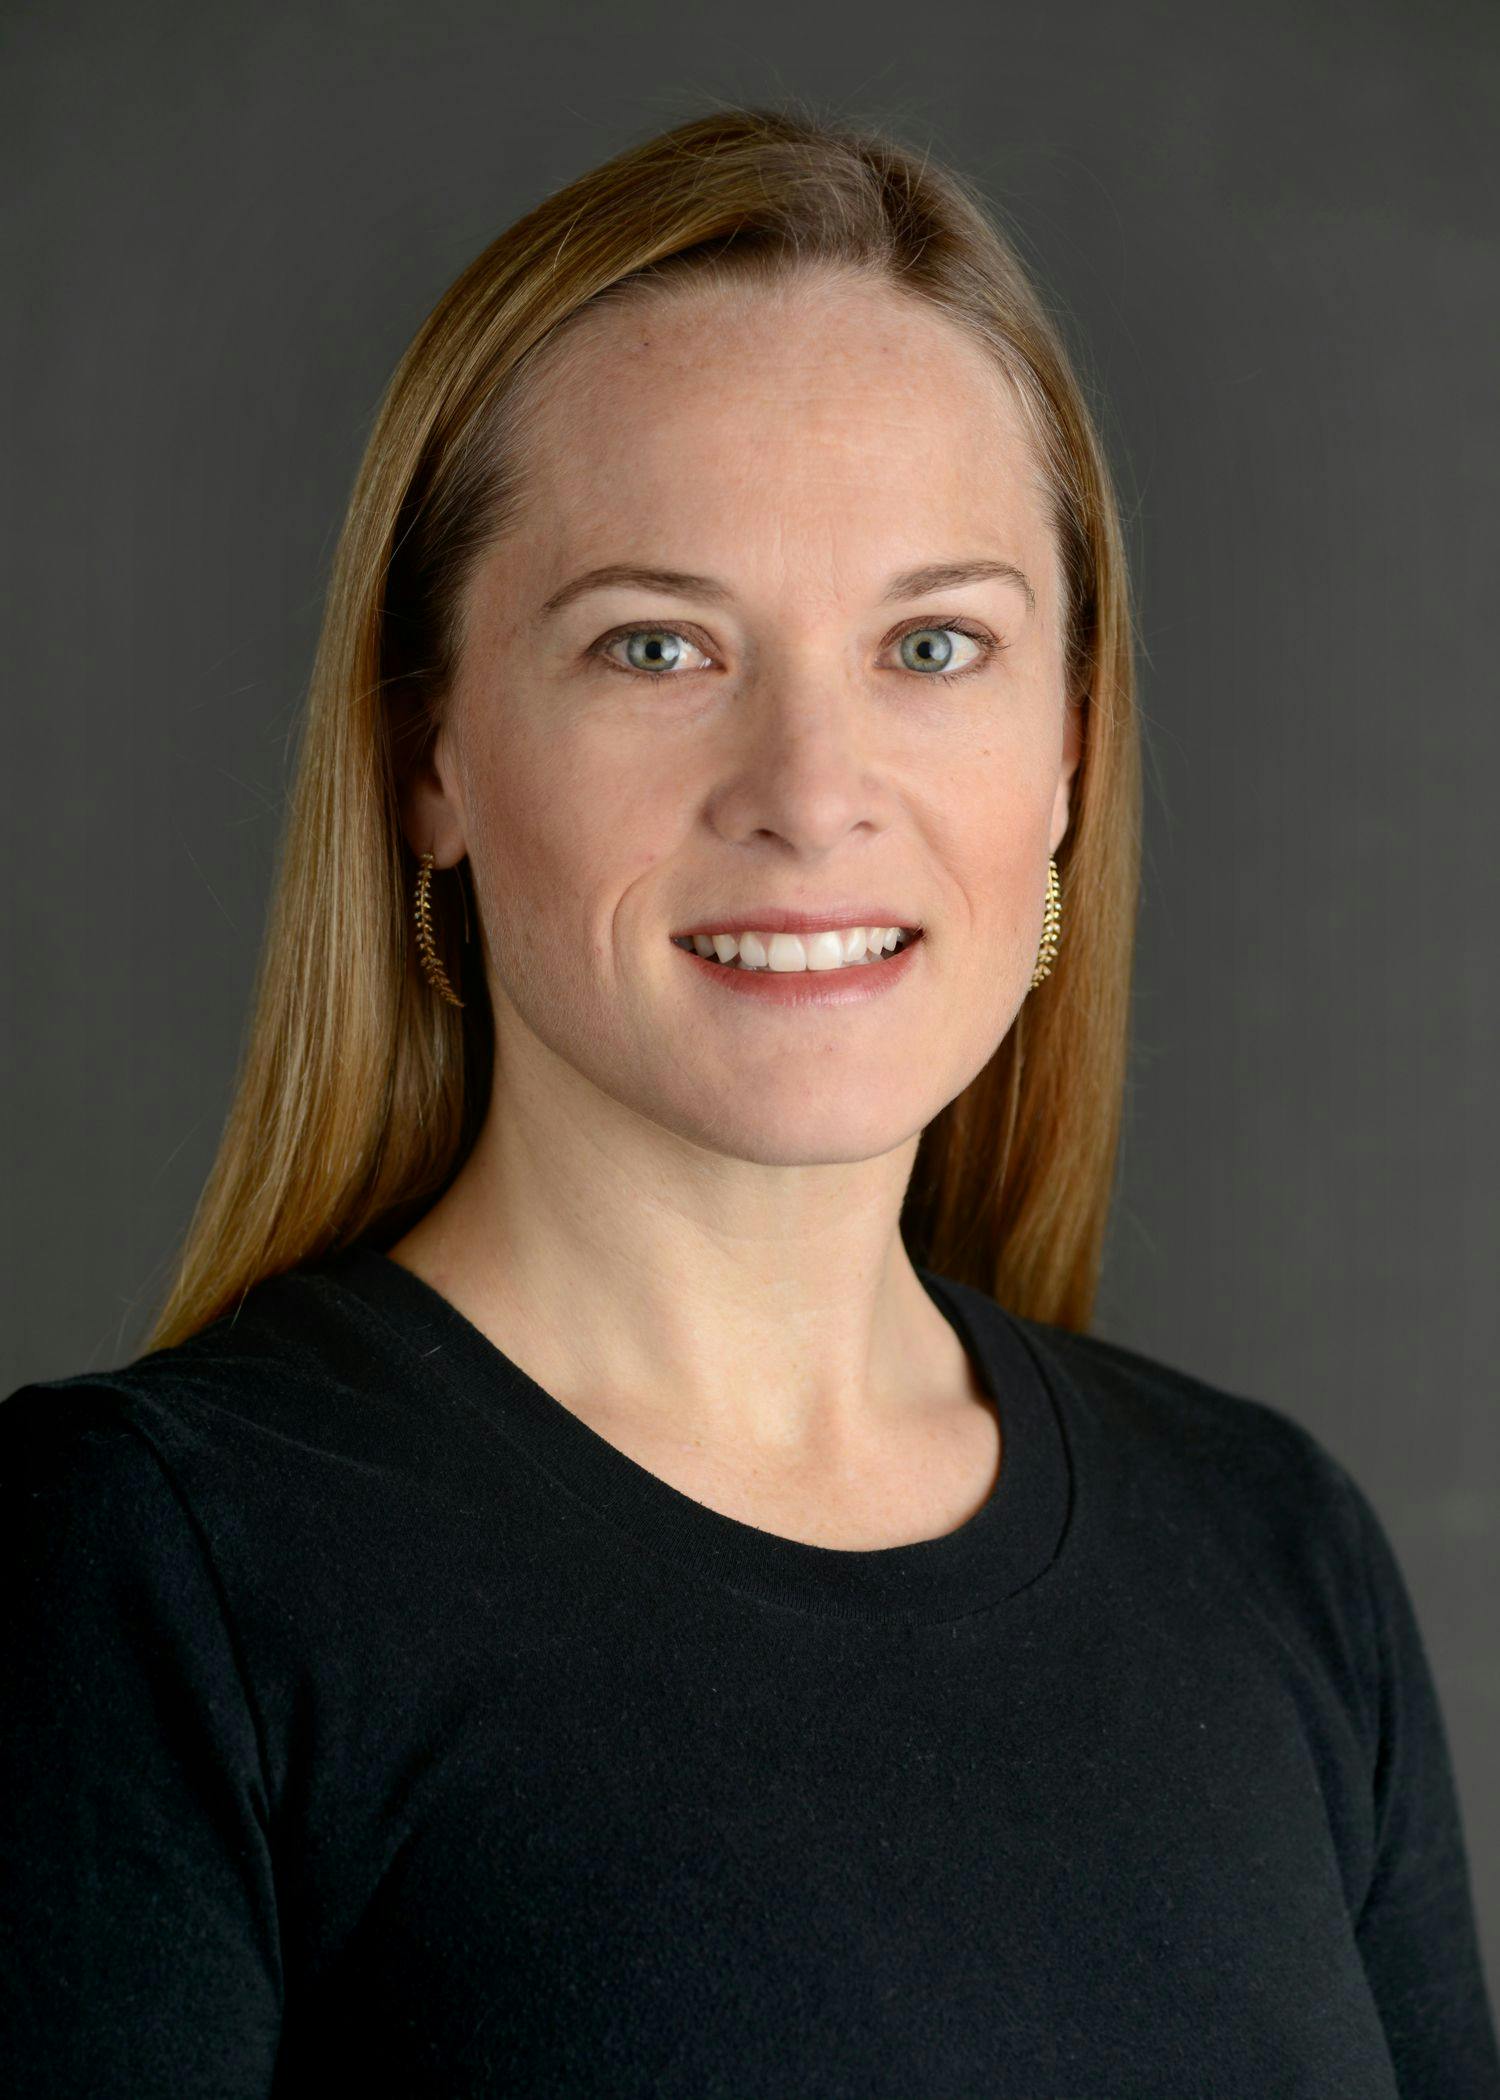 Kathryn Mileham, MD

Chief of Thoracic Medical Oncology

Atrium Health Levine Cancer Institute – Morehead

Charlotte, NC